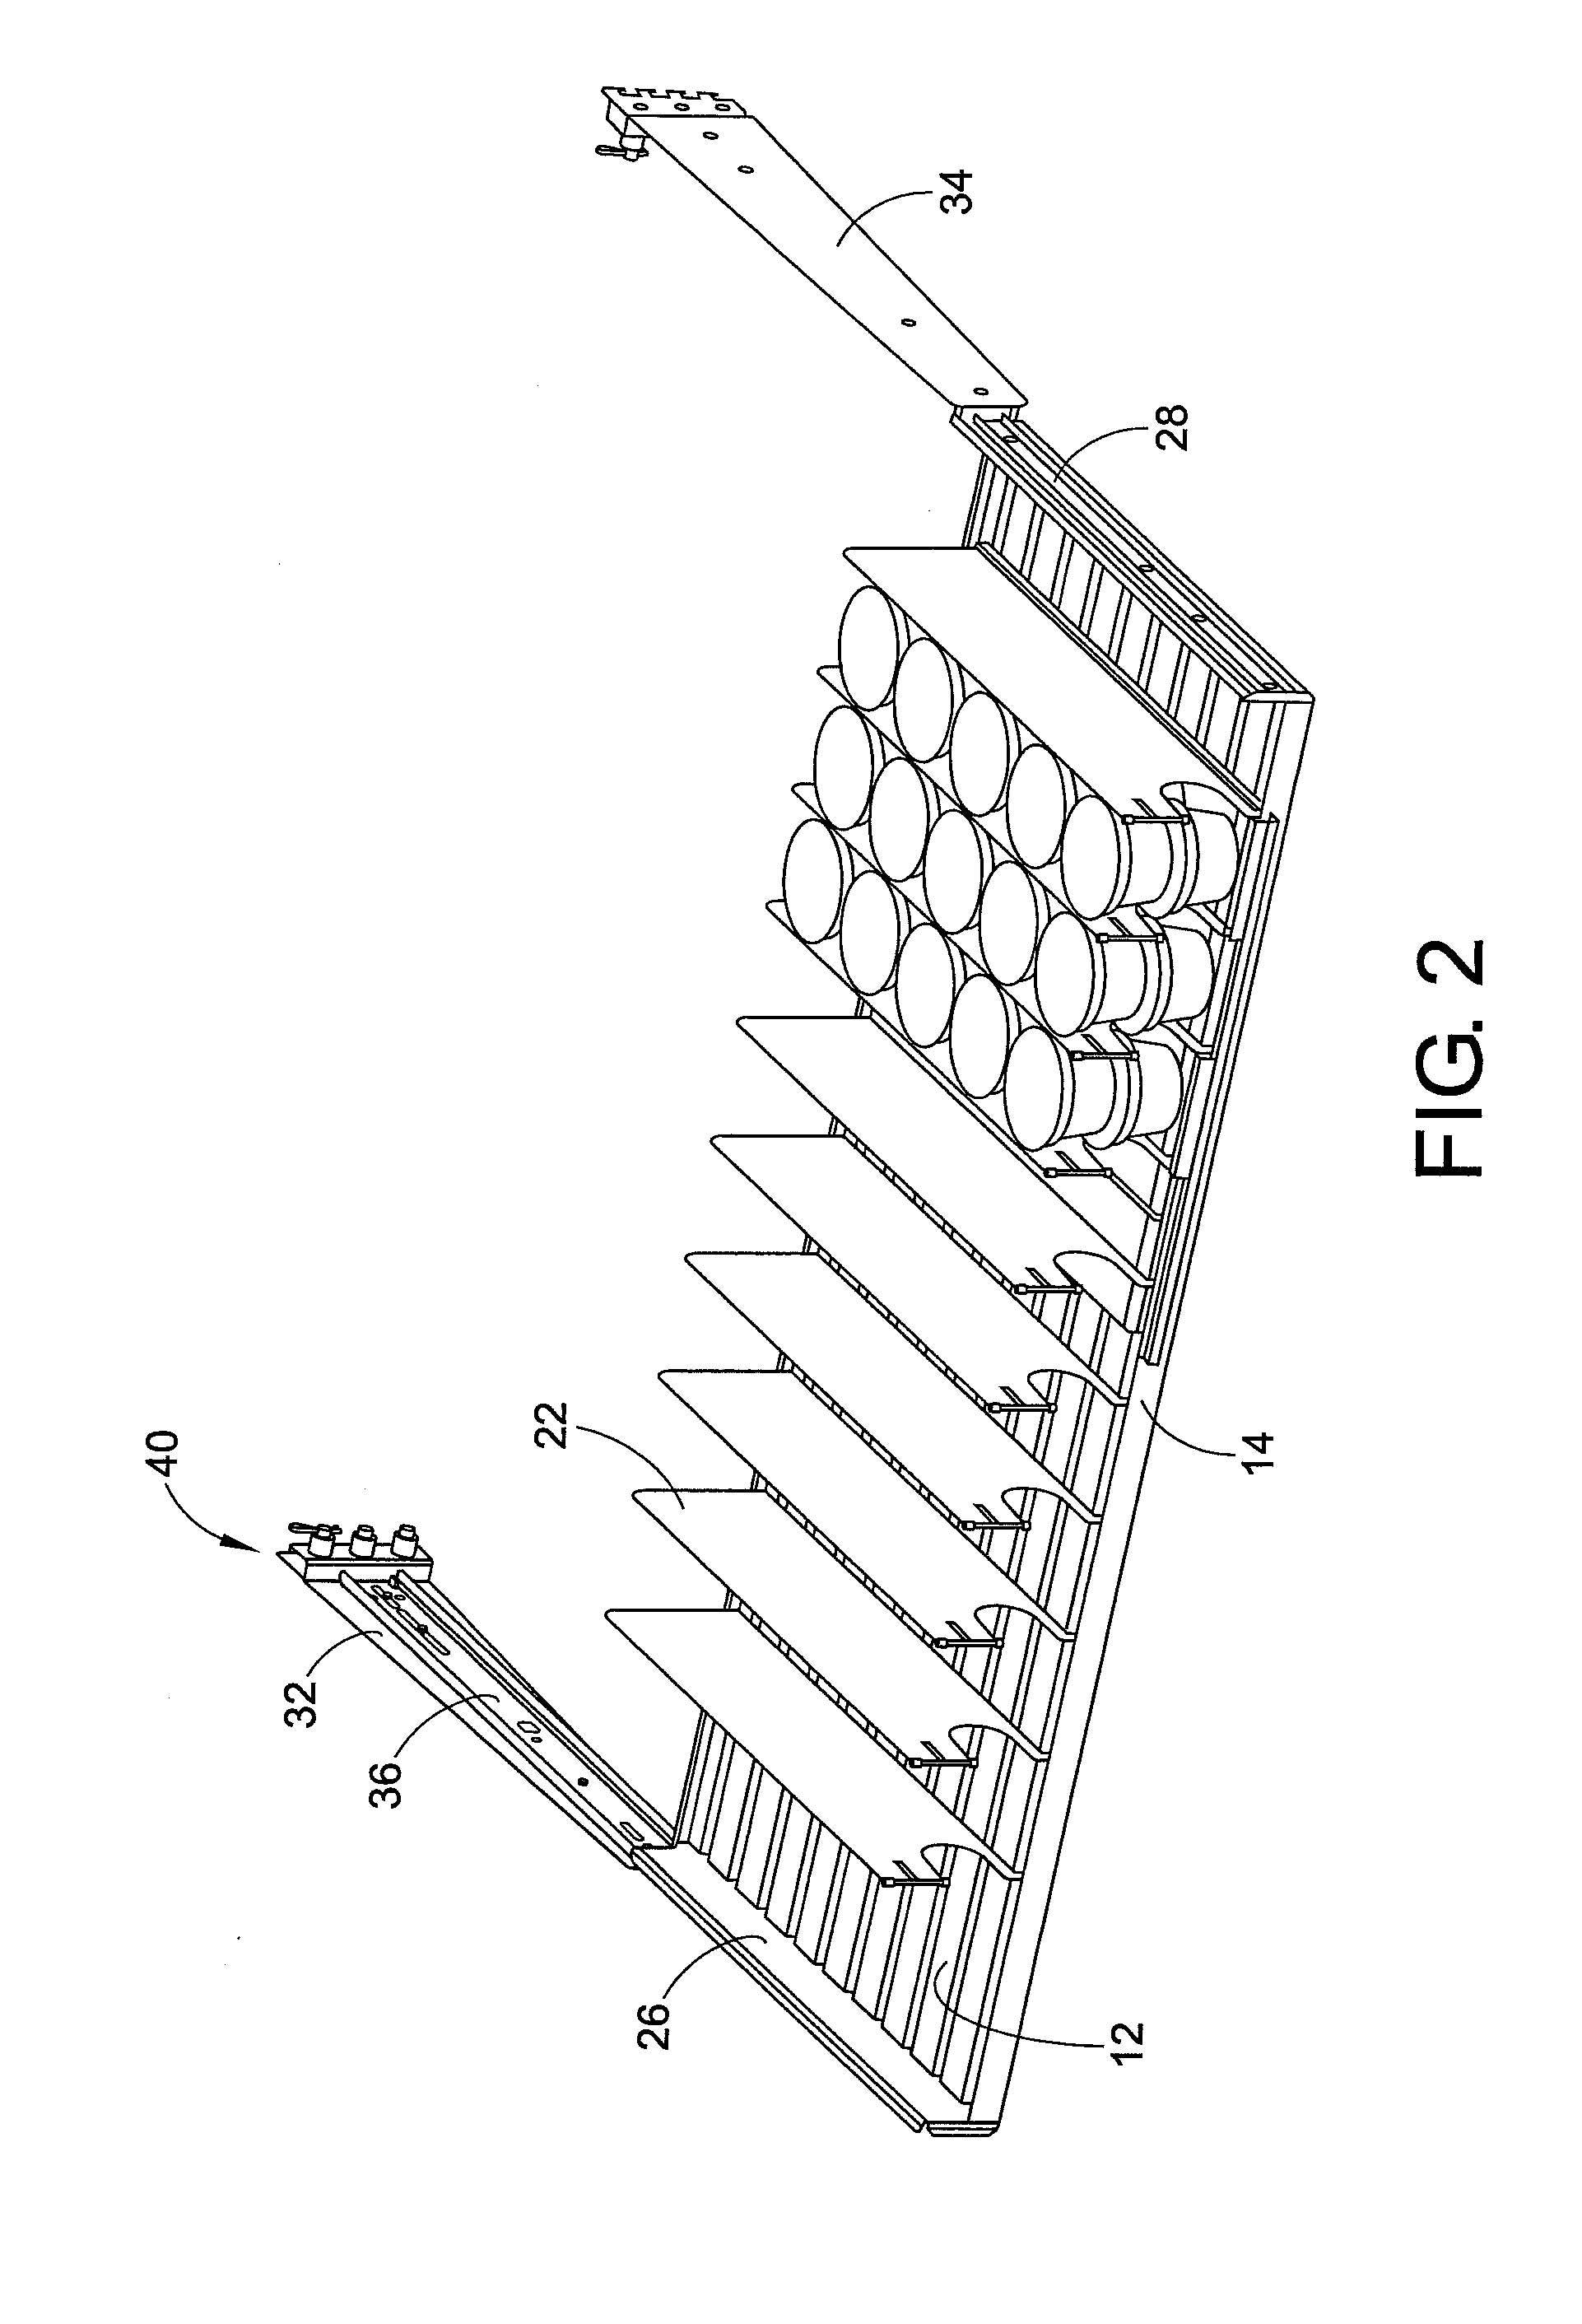 Adjustable mounting structure for a shelving system